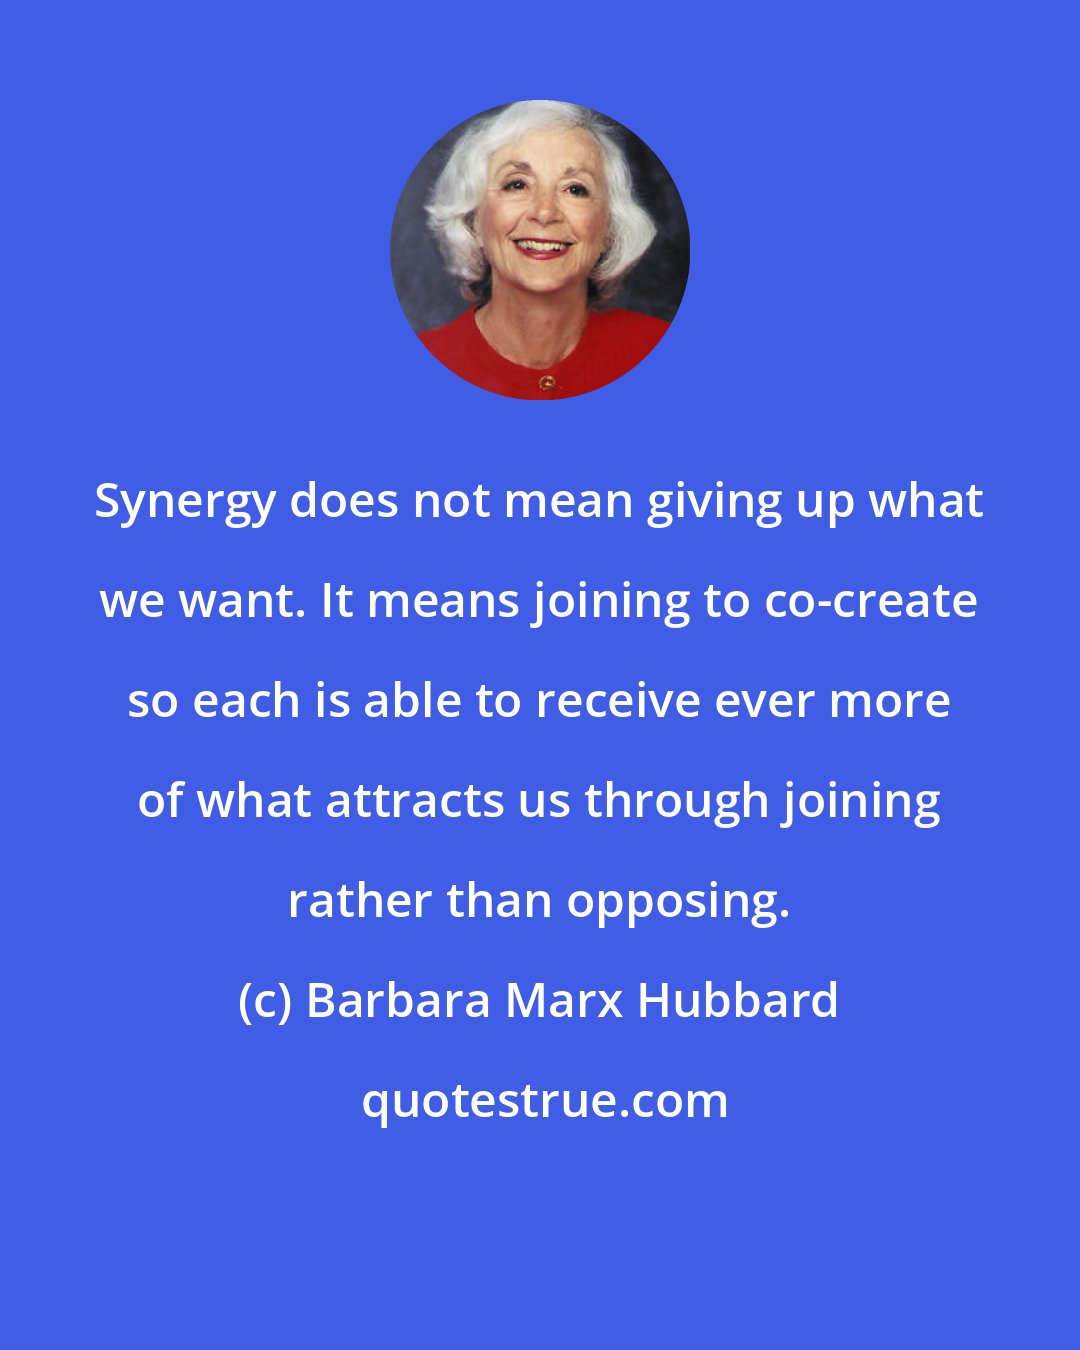 Barbara Marx Hubbard: Synergy does not mean giving up what we want. It means joining to co-create so each is able to receive ever more of what attracts us through joining rather than opposing.